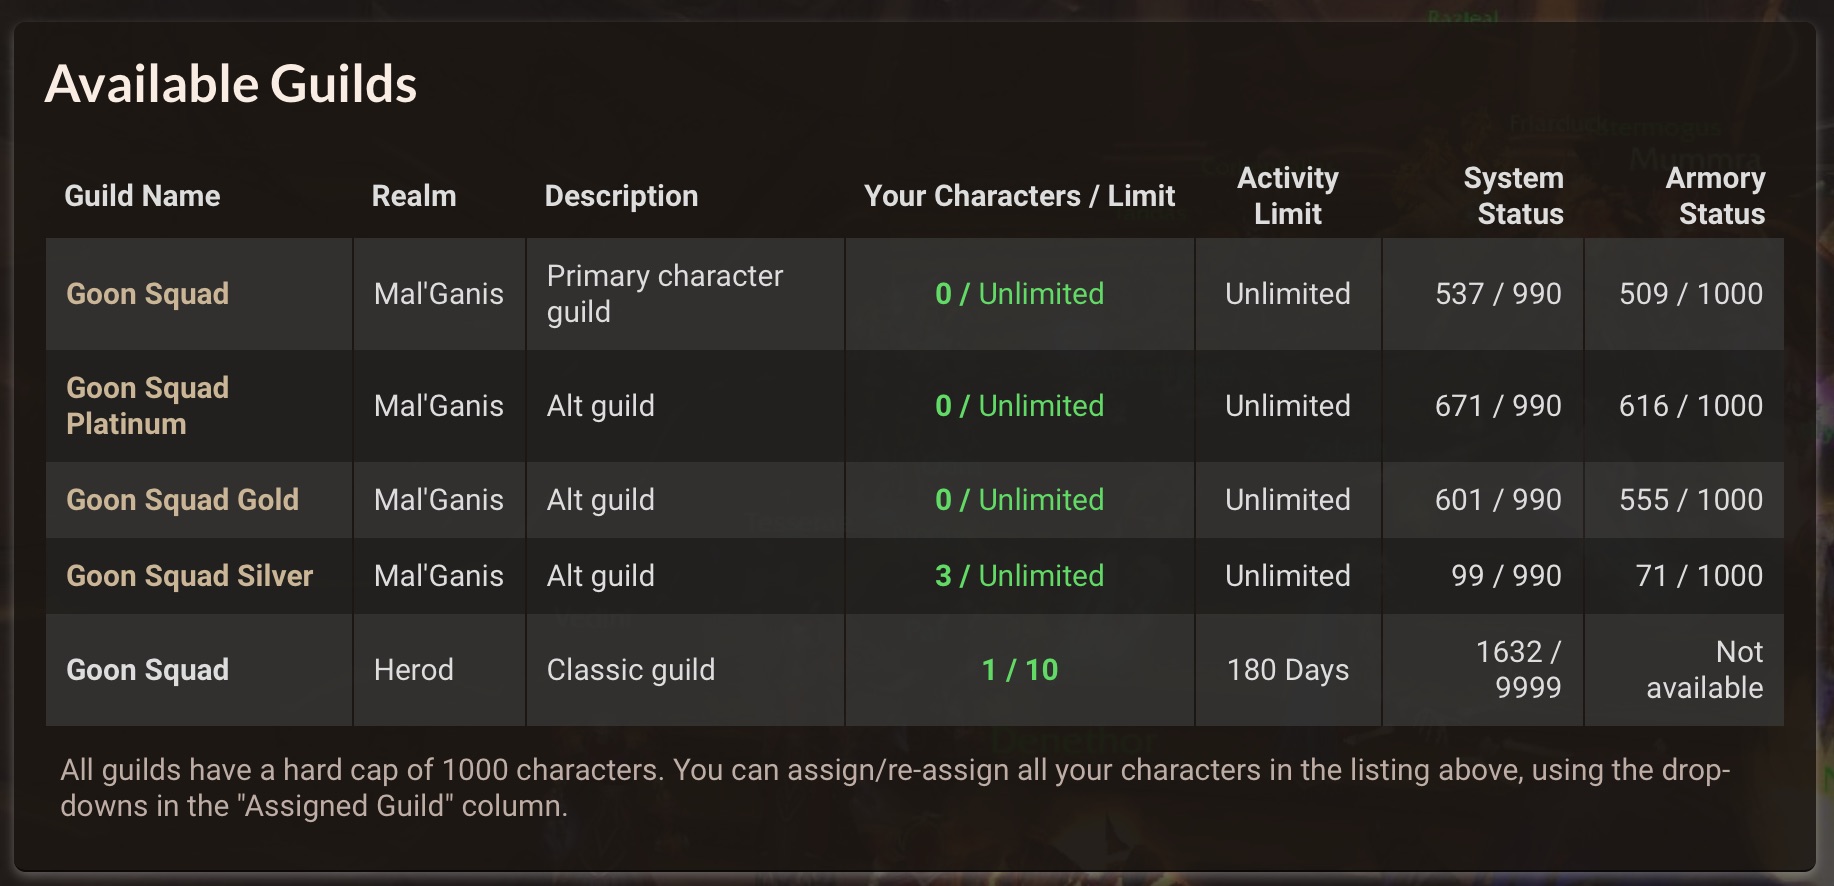 A screenshot of the ZDKP avaliable guilds chart. Five Guilds are listed. Four on the Mal'Ganis Realm: Goon Squad, GS Platinum, GS Gold, GS Silver and one on the Herod realm: Goon Squad Classic. The Mal'Ganis/retail guilds show unlimited character and activity limits, while the Classic guild shows a 10 character limit and 180 day activity limit. There are system status and armory status columns showing how many characters are supposed to be in the guild and actually are in the guild respectively.